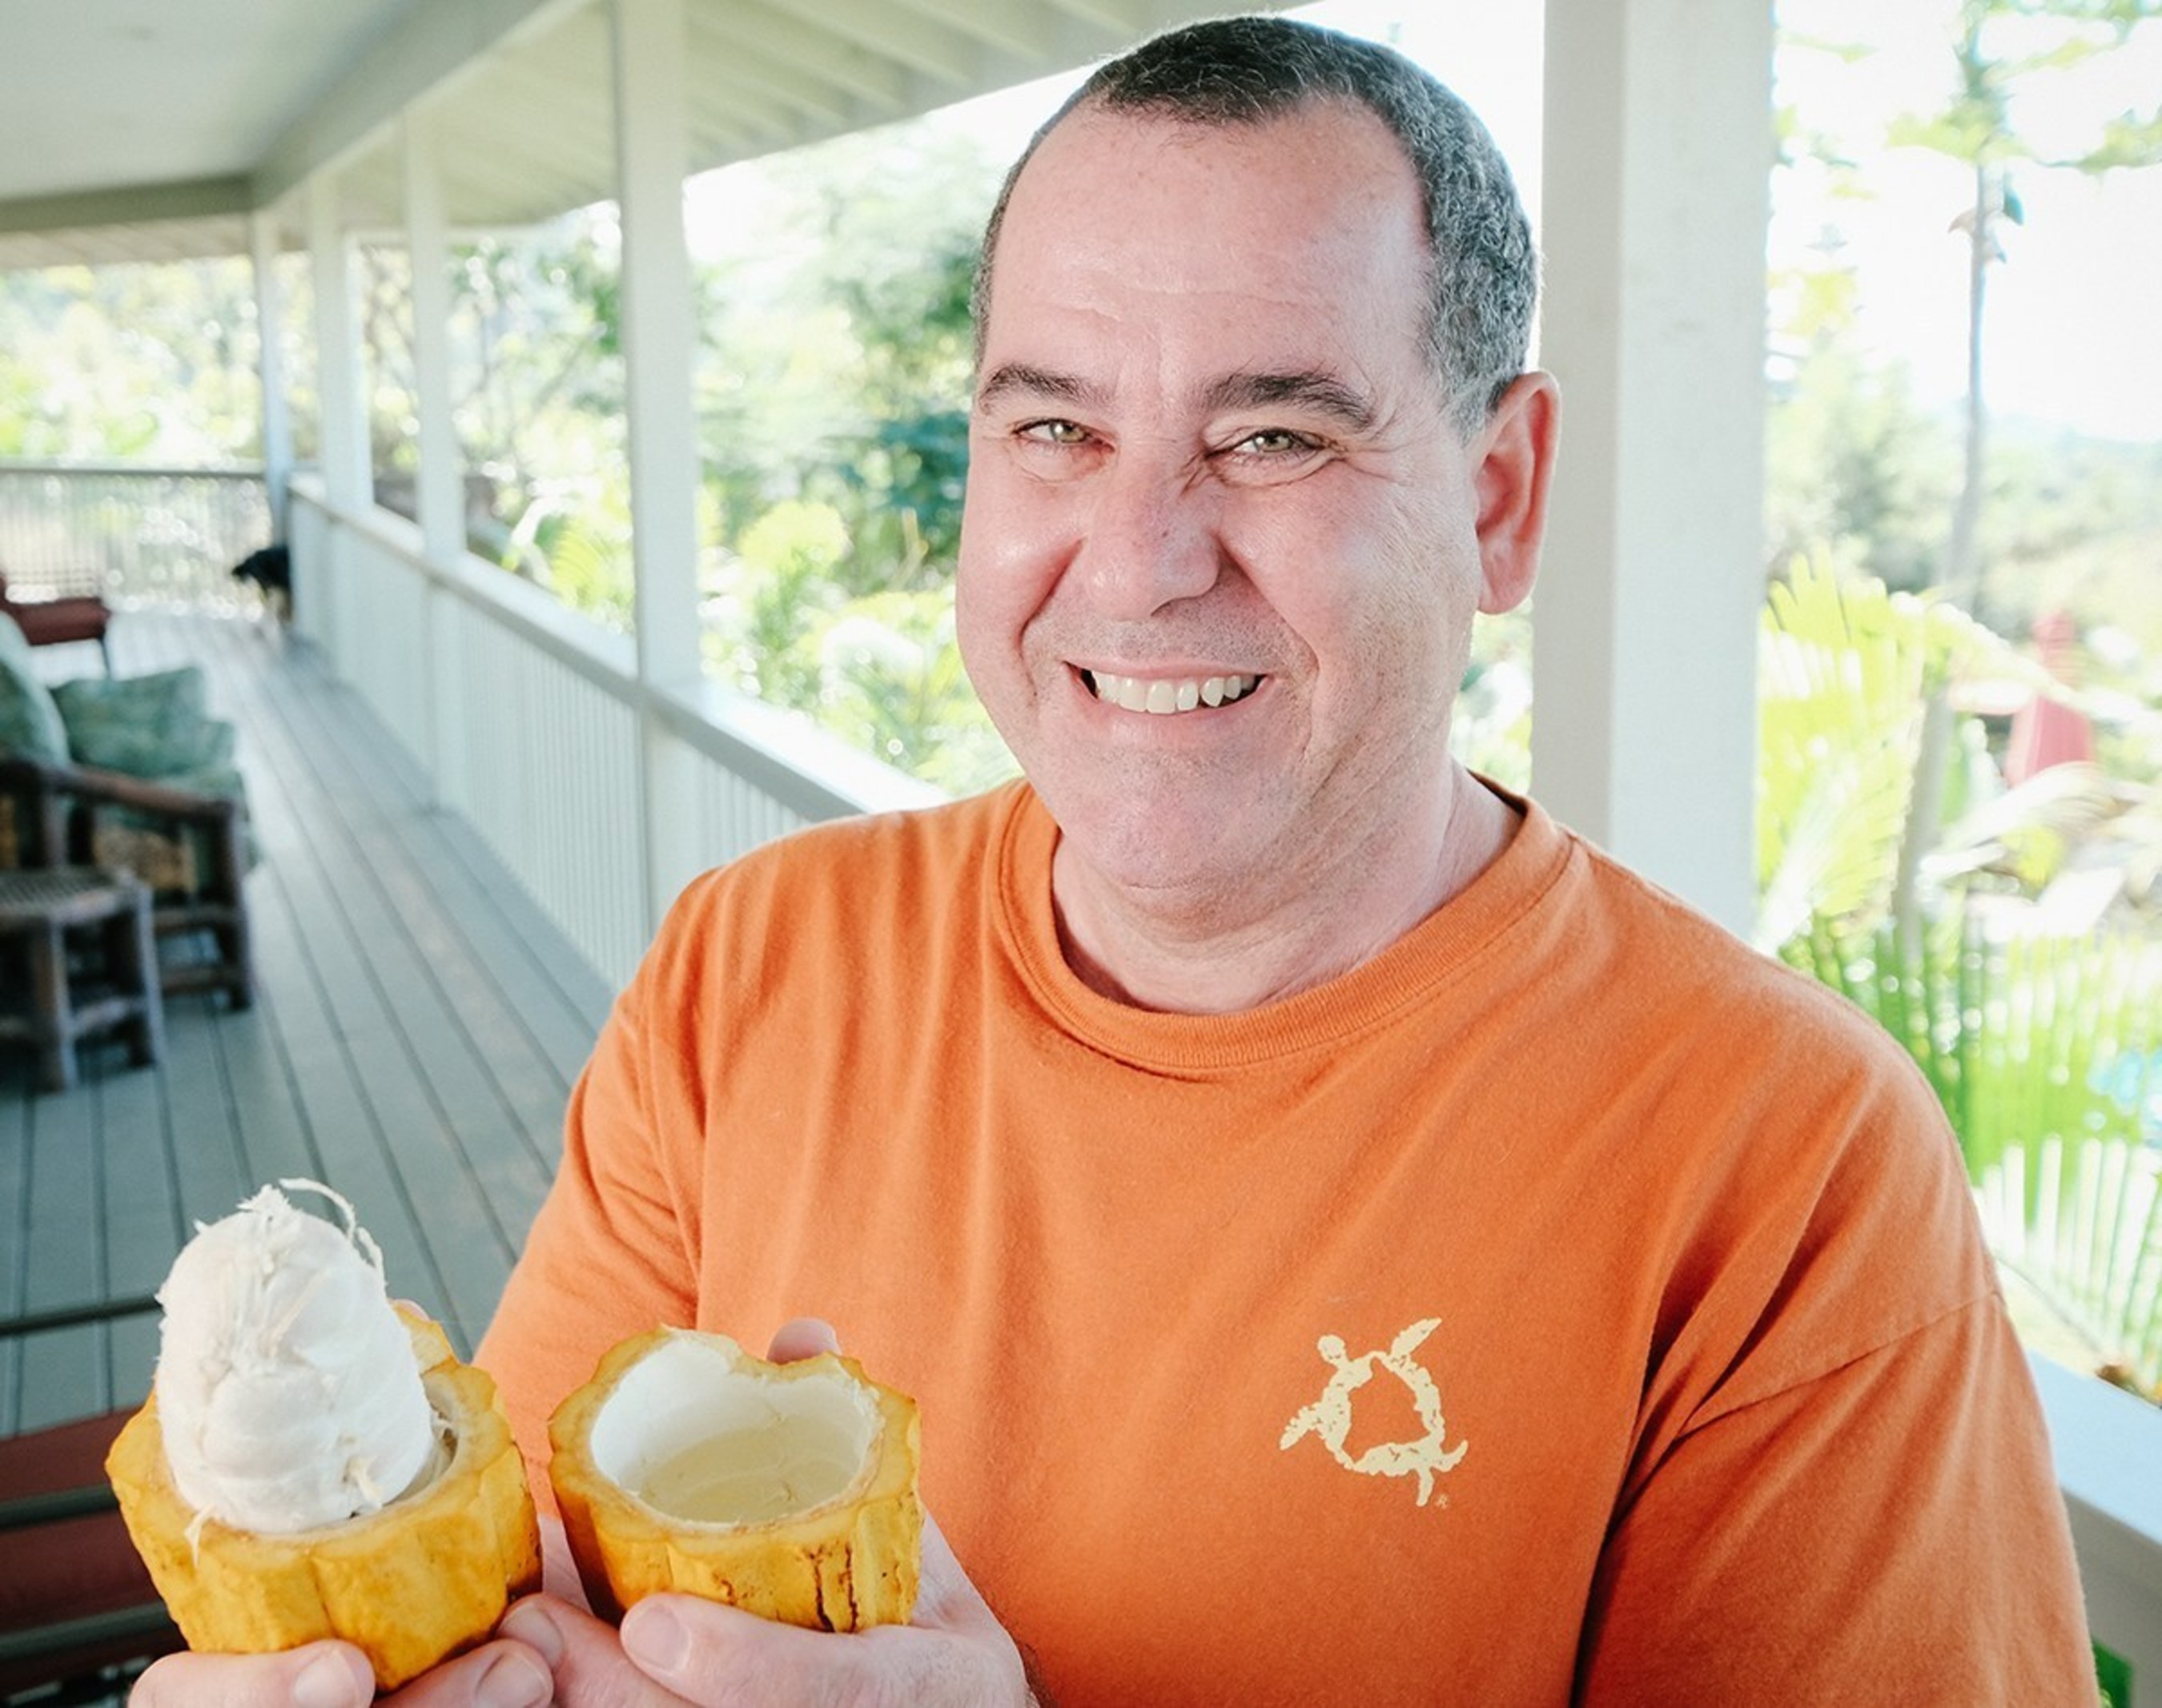 Greg Colden, co-owner of Kokoleka Farms, a cacao farm in Kona, Hawaii holds a cacao pod. Guests of the chocolate tour will sample the raw cacao and chocolate created from the cacao on the farm.